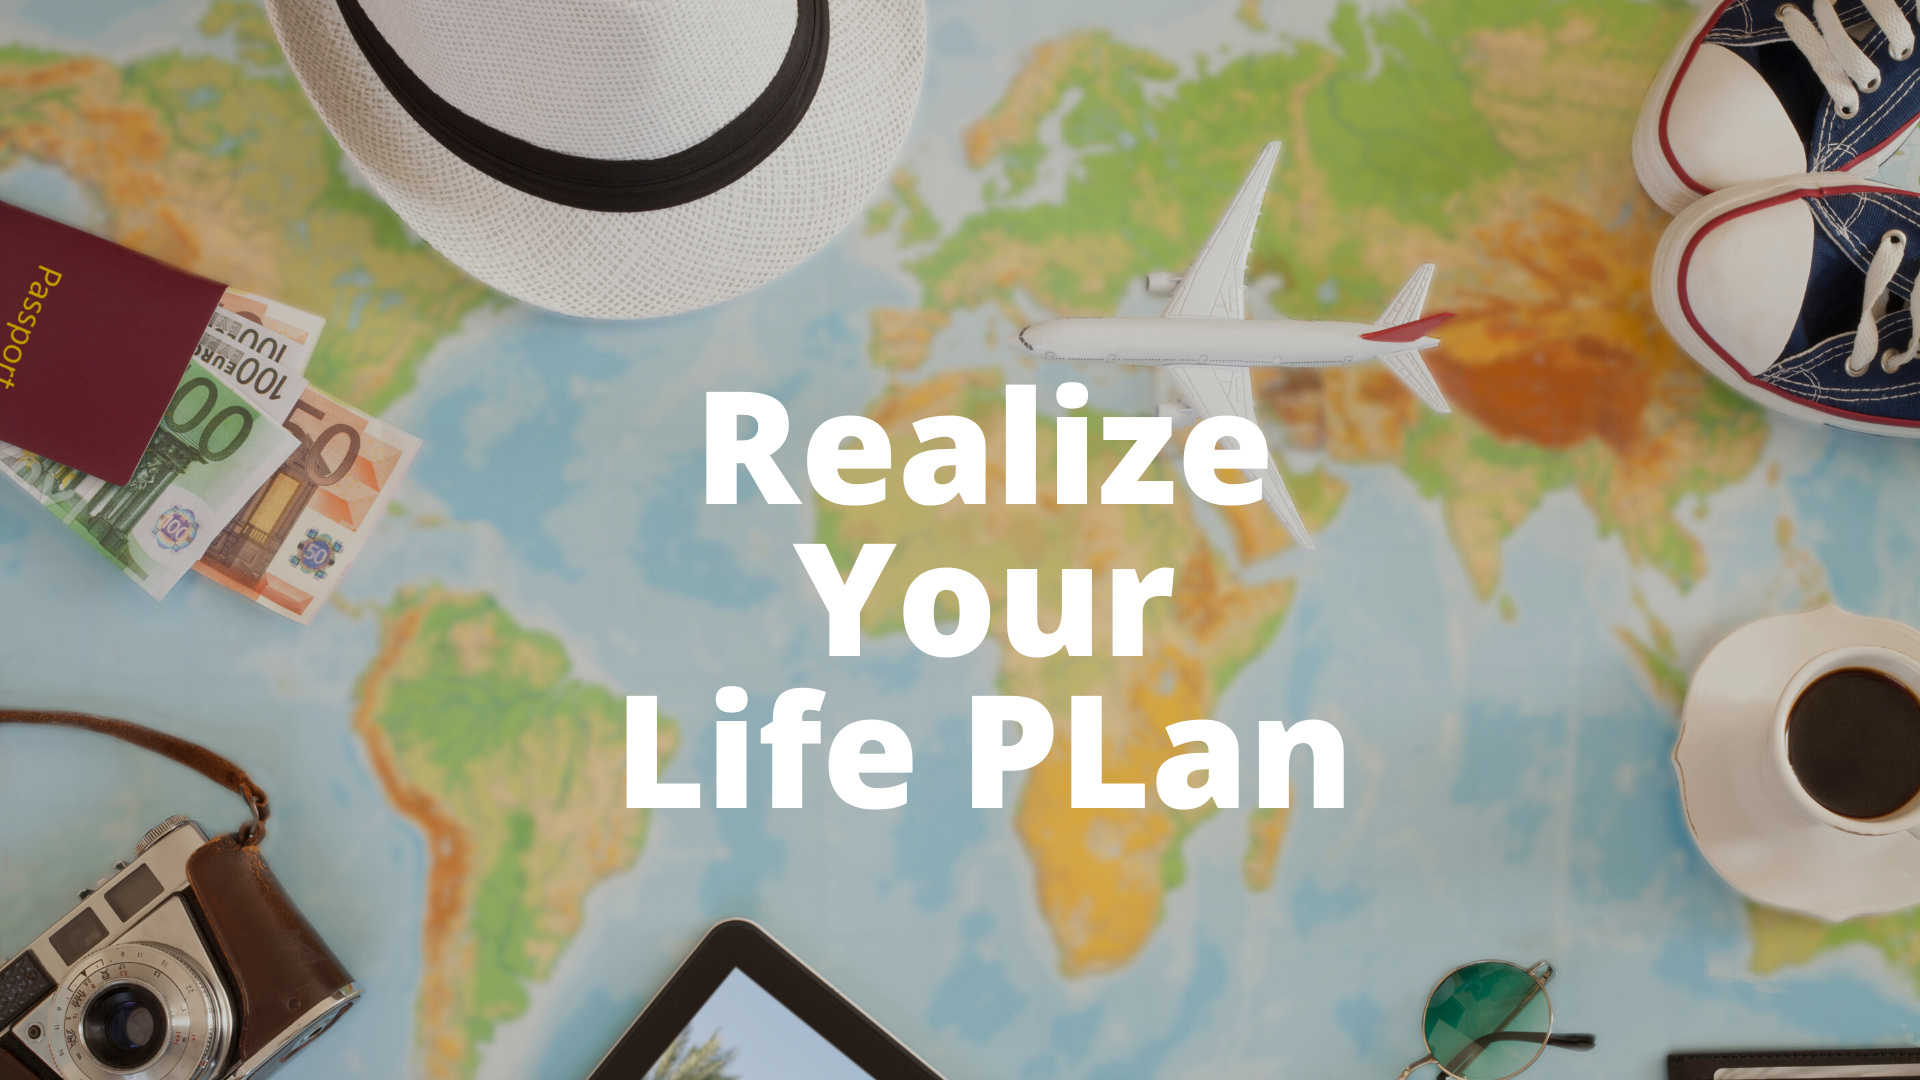 Financial Planning is About Making Your Life Plan a Reality